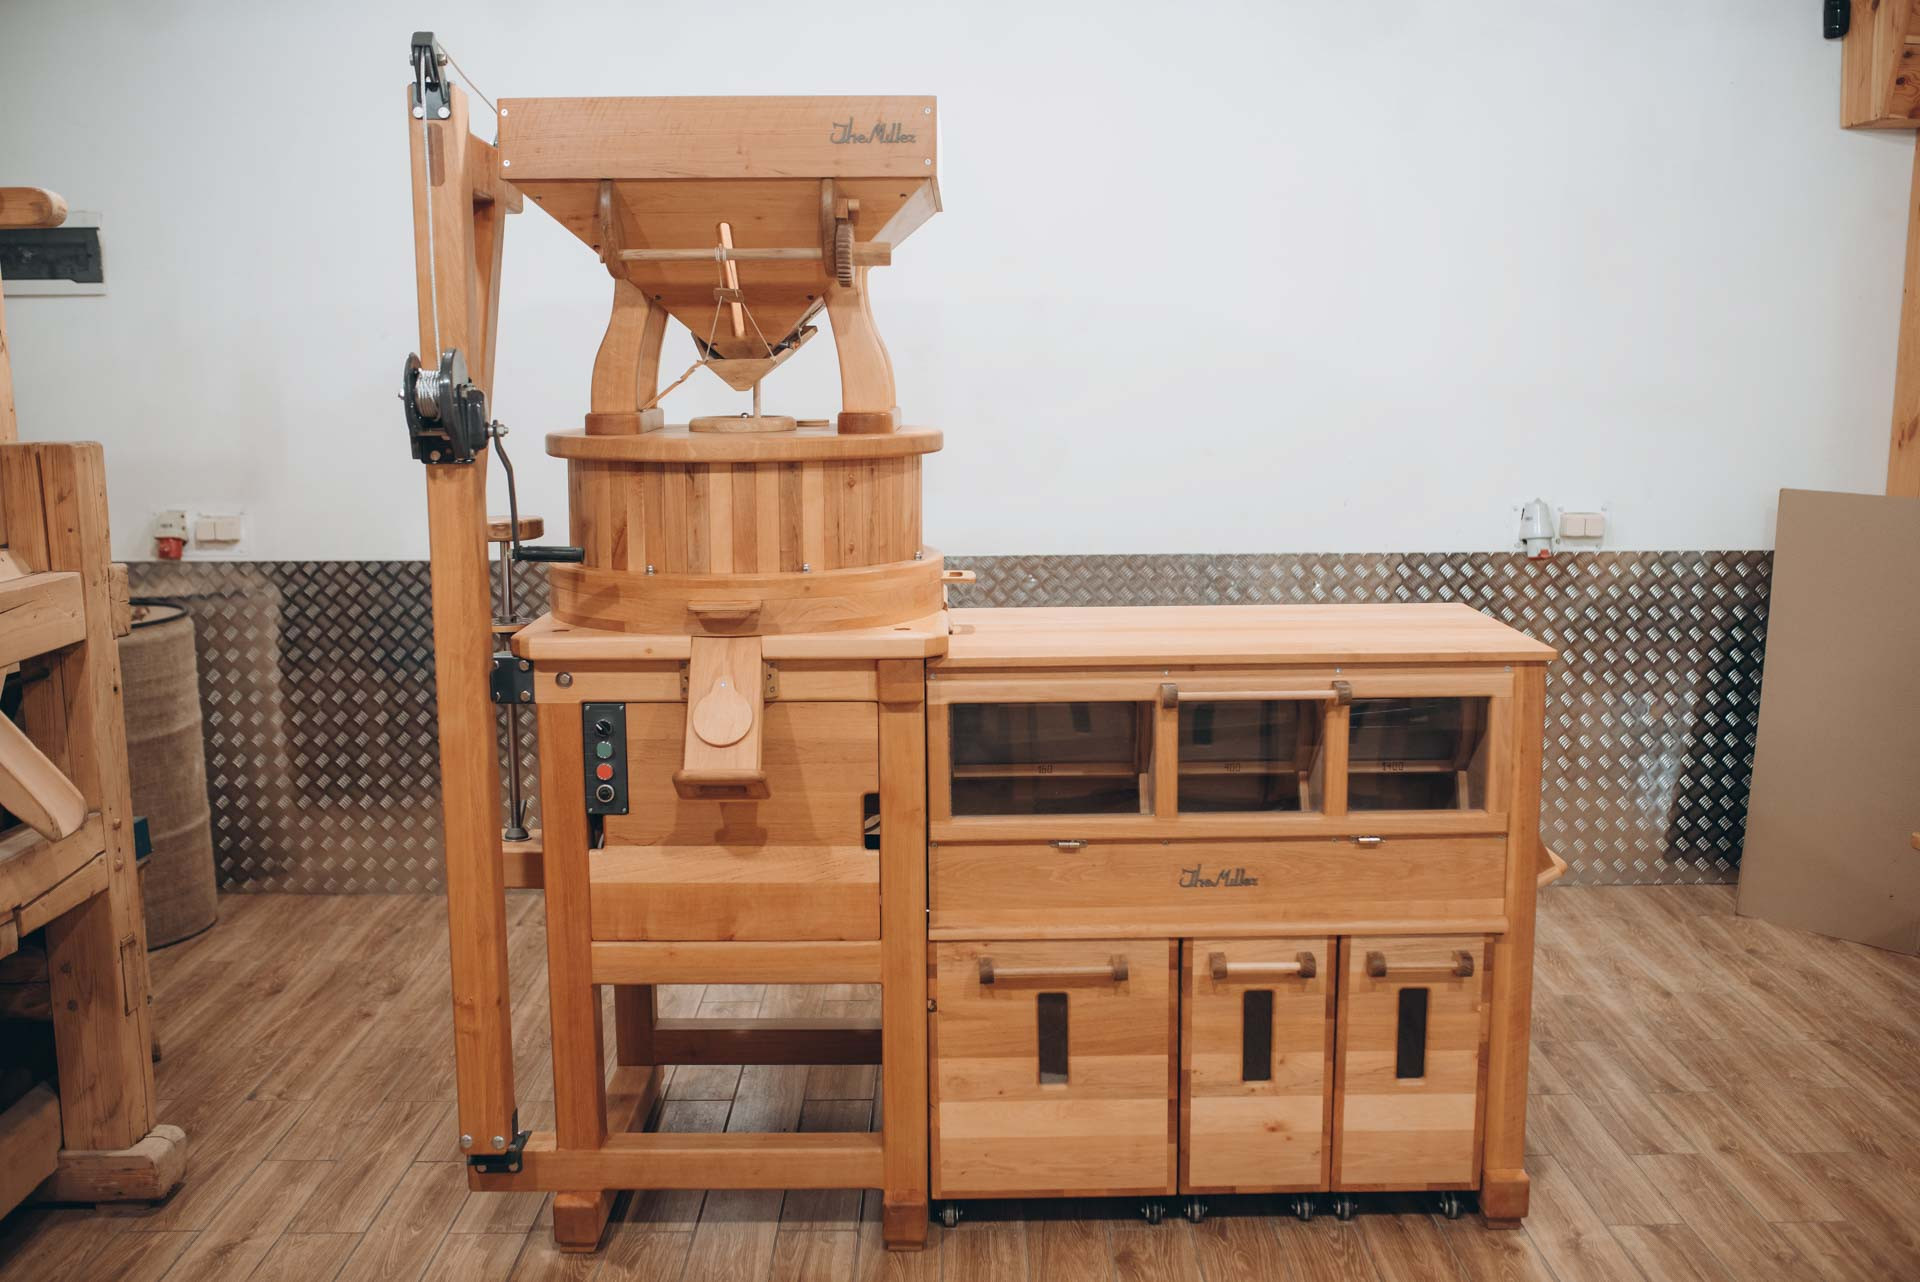 Mill with sifter D-50S